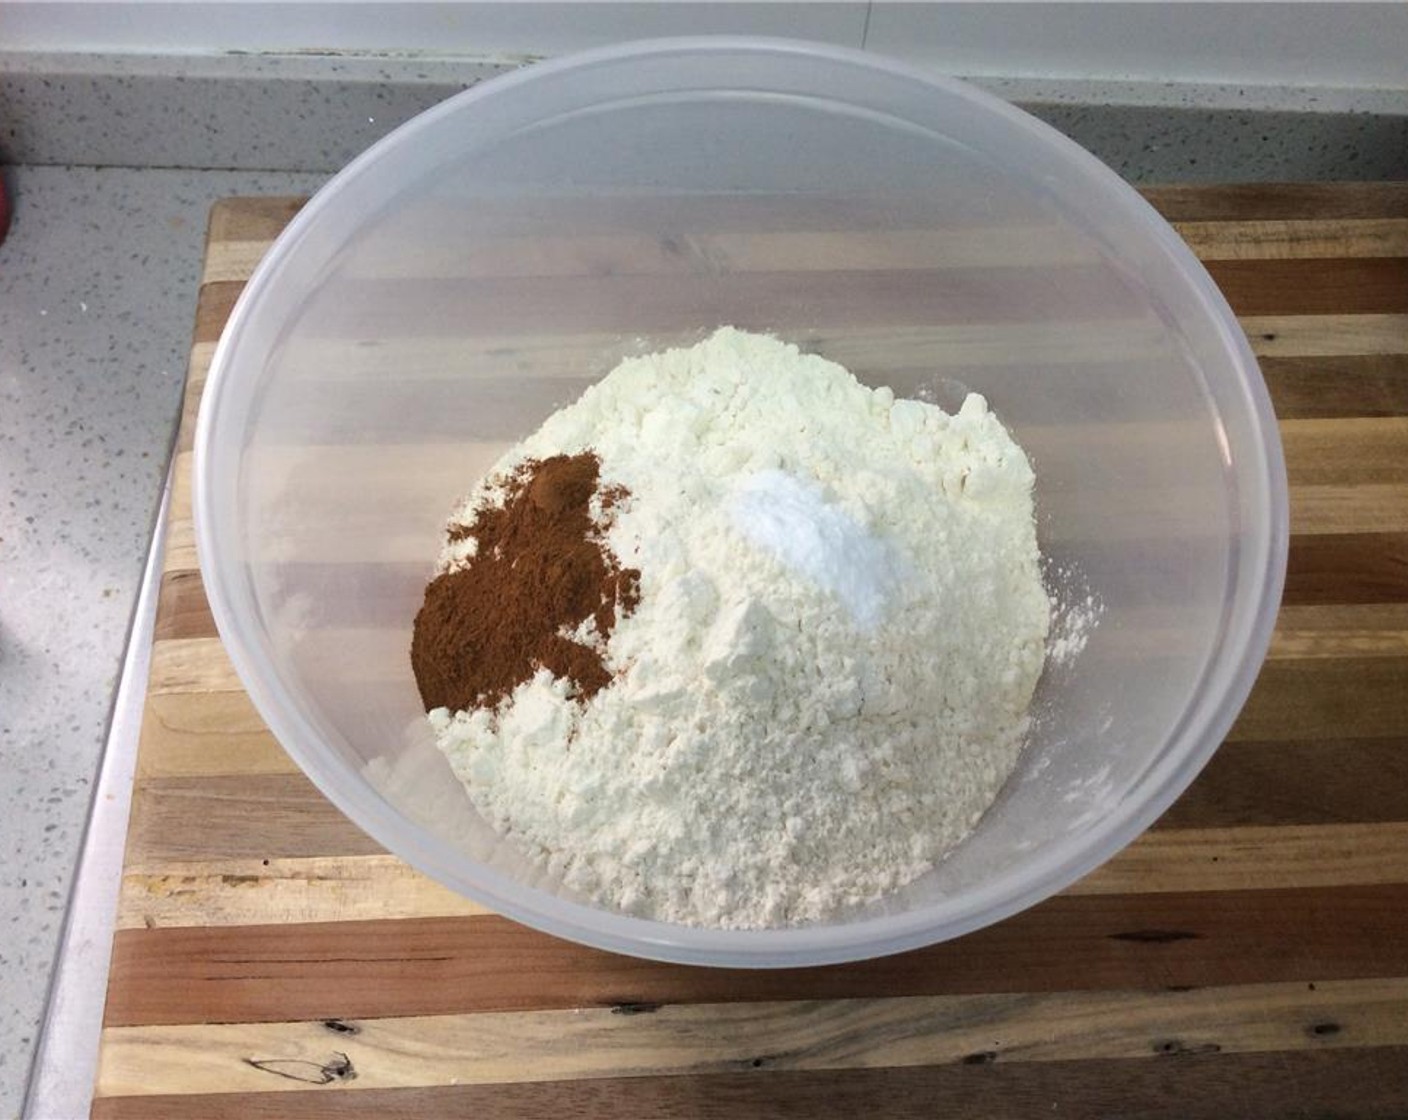 step 6 In another bowl, combine All-Purpose Flour (2 cups), Baking Soda (1 tsp), Salt (1 tsp) and Ground Cinnamon (1/2 Tbsp).